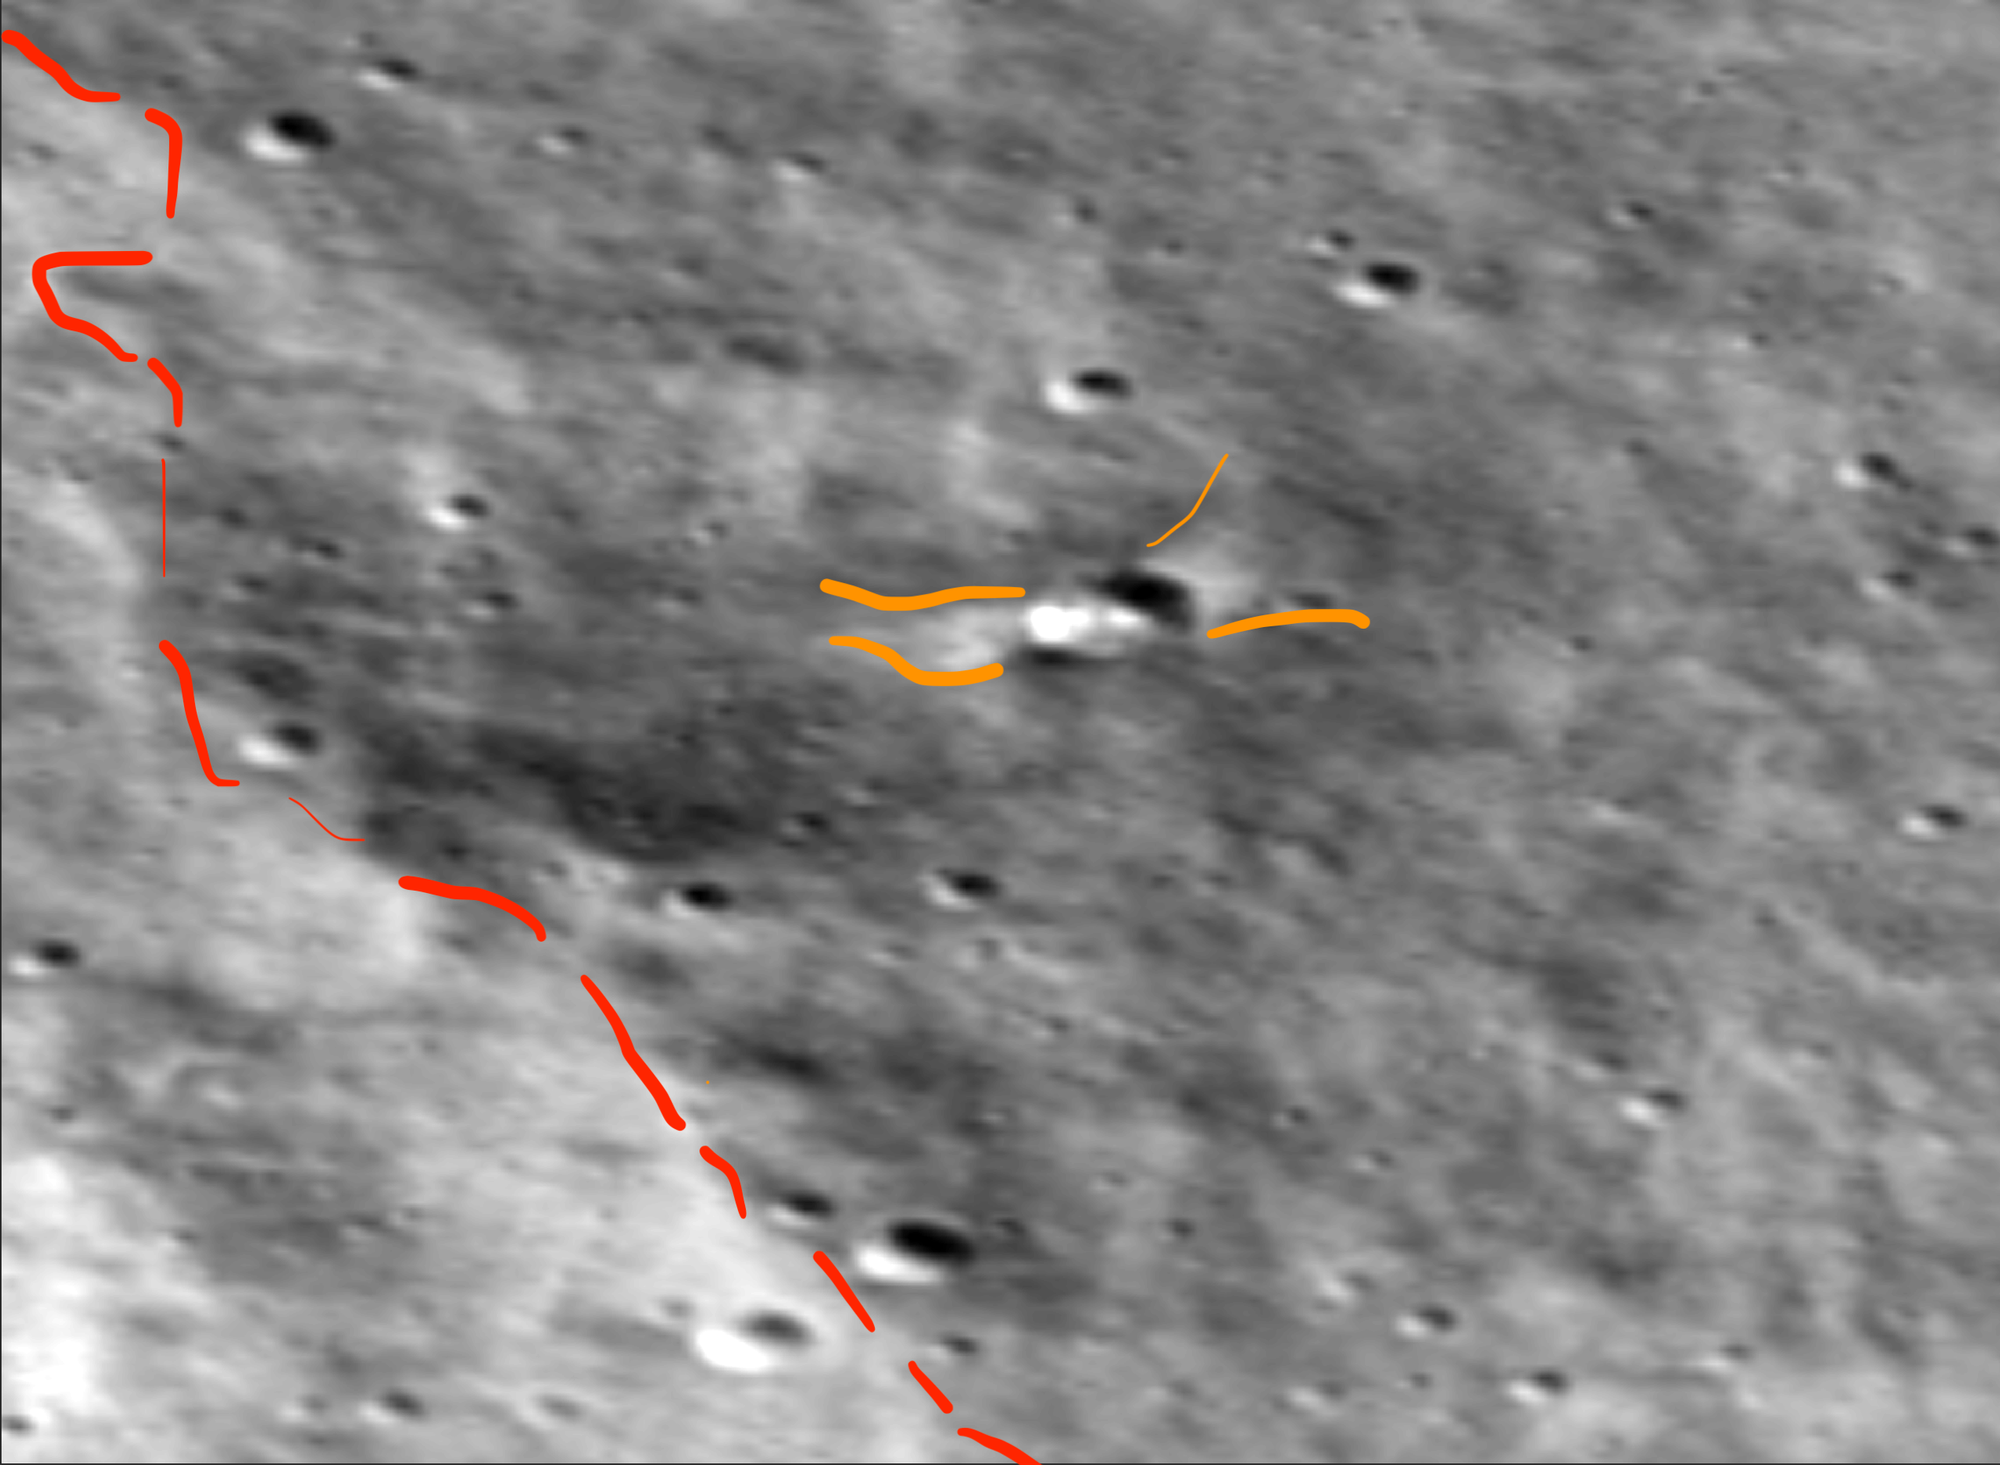 A close-up view of the impact site showing the ejecta left by Luna-25